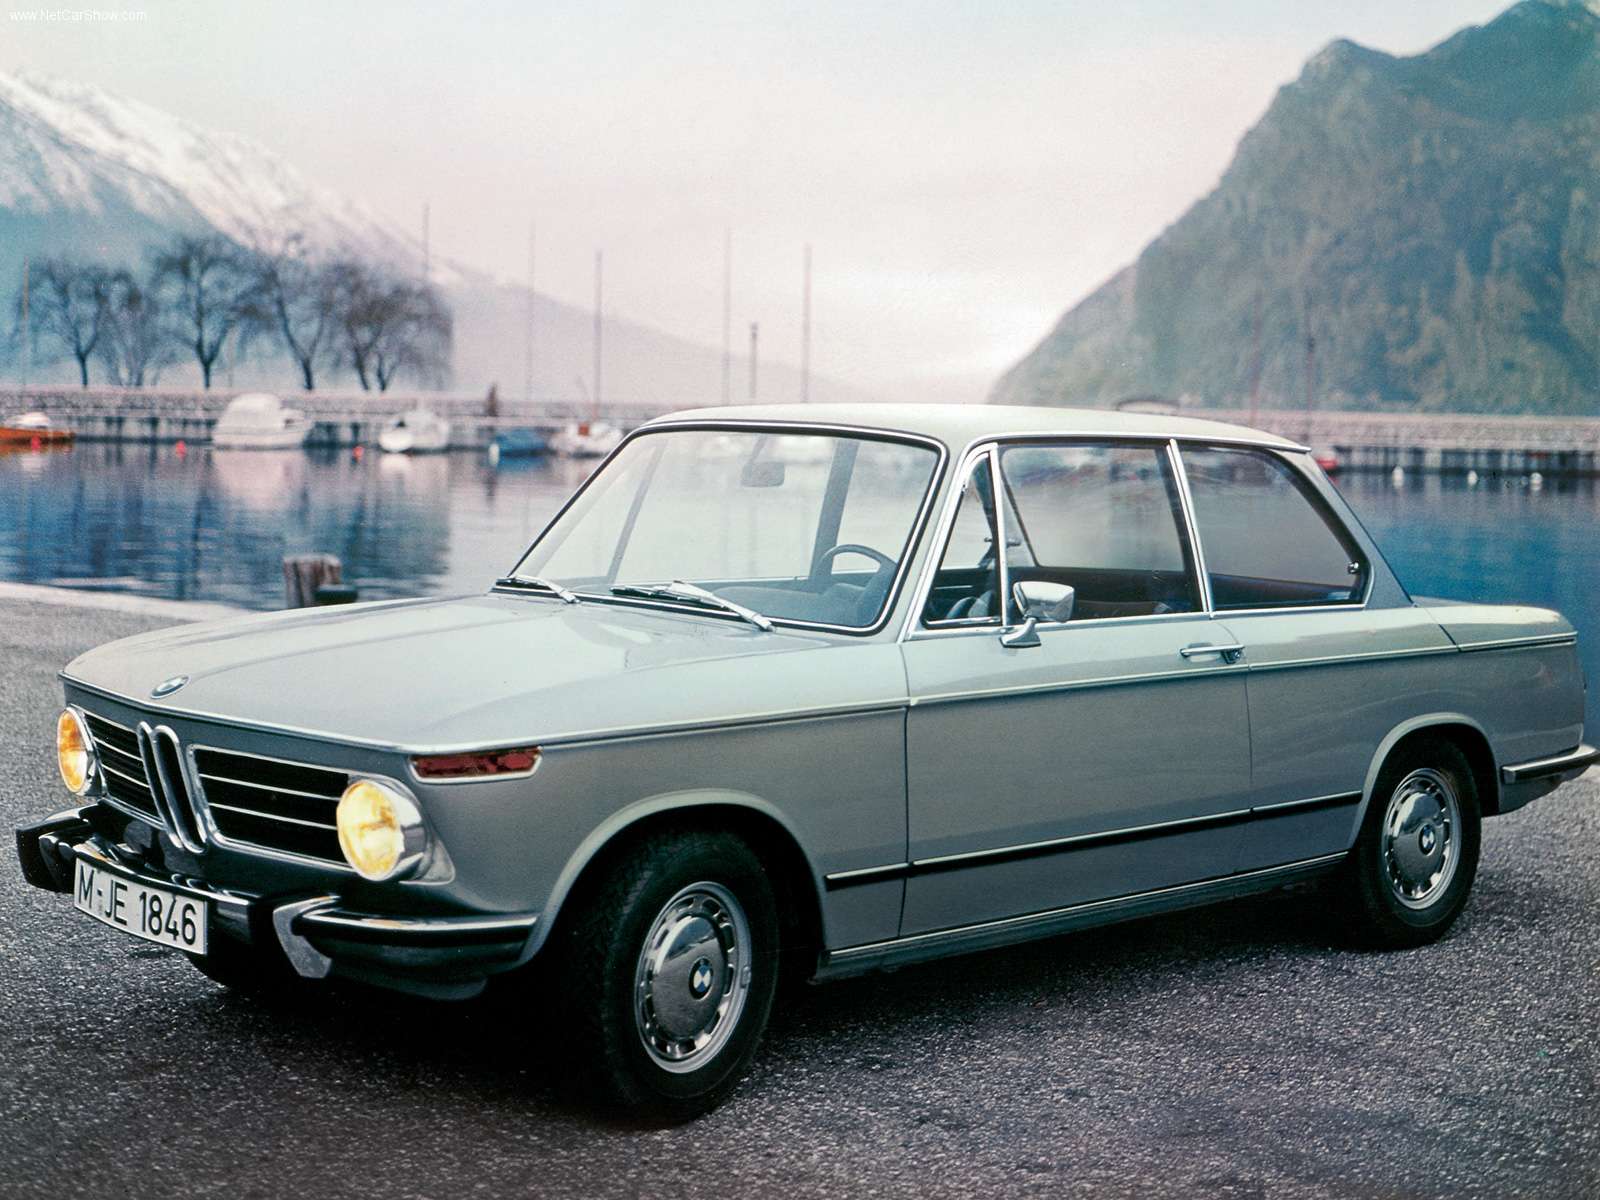 When the past becomes actual today with BMW 2002 1502 model #8